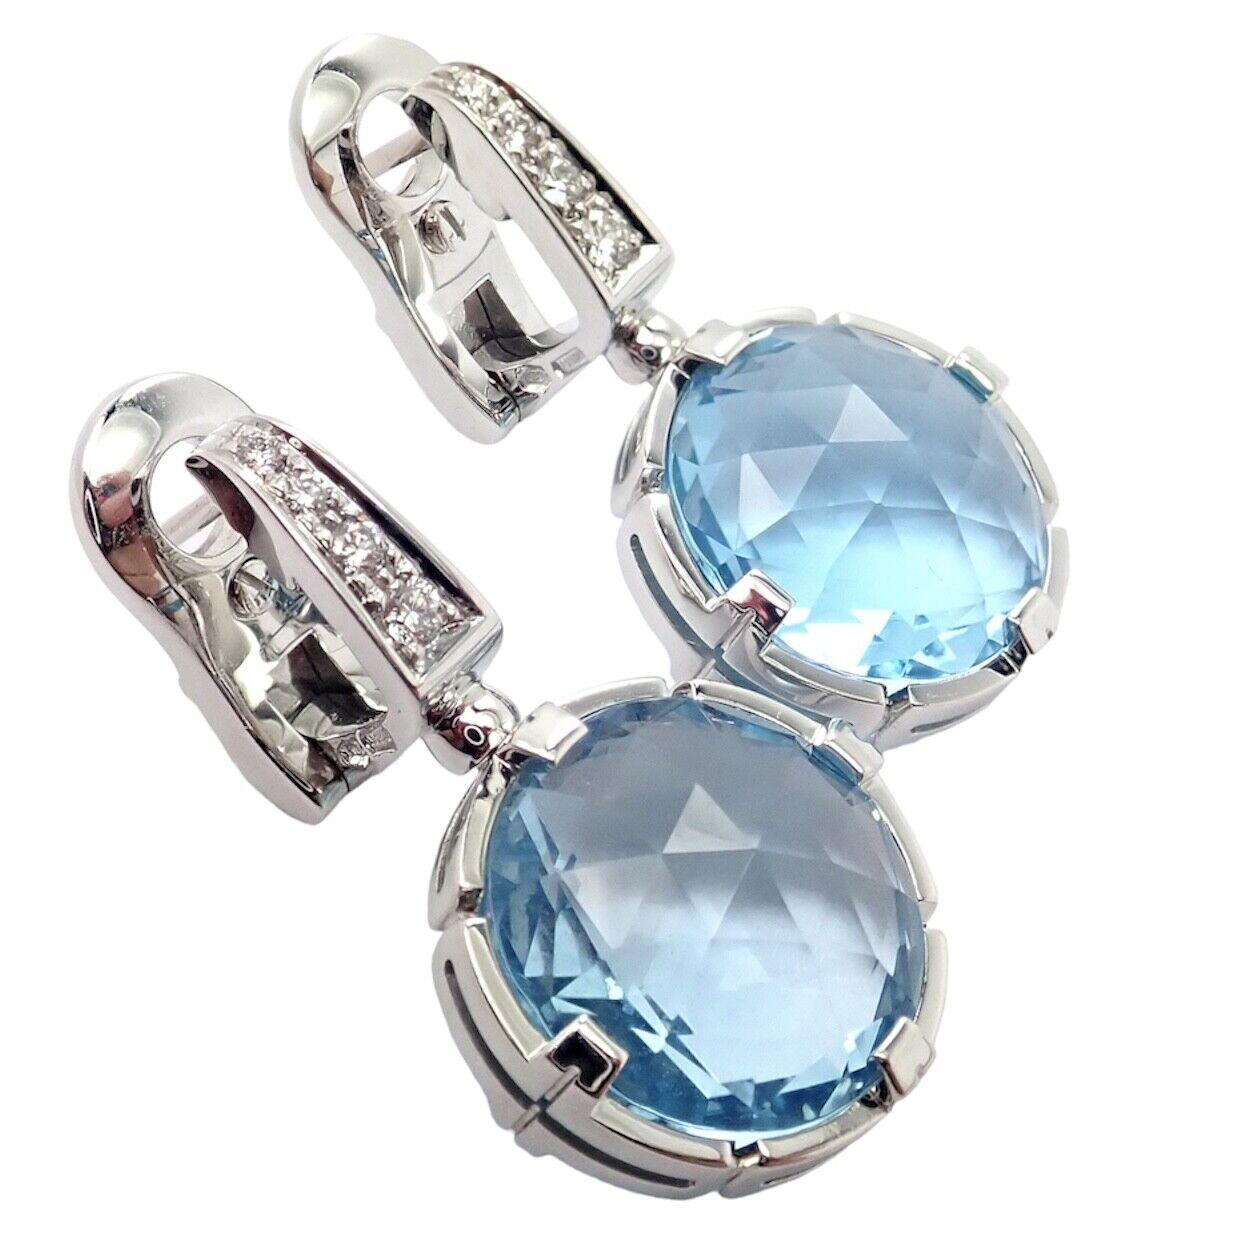 18k White Gold Diamond Blue Topaz Parentesi Earrings by Bulgari. 
With 8x round brilliant cut diamonds VS1 clarity, G color total weight approx. 0.10ctw
2x round blue topaz stones 12mm each
These earrings are made for pierced